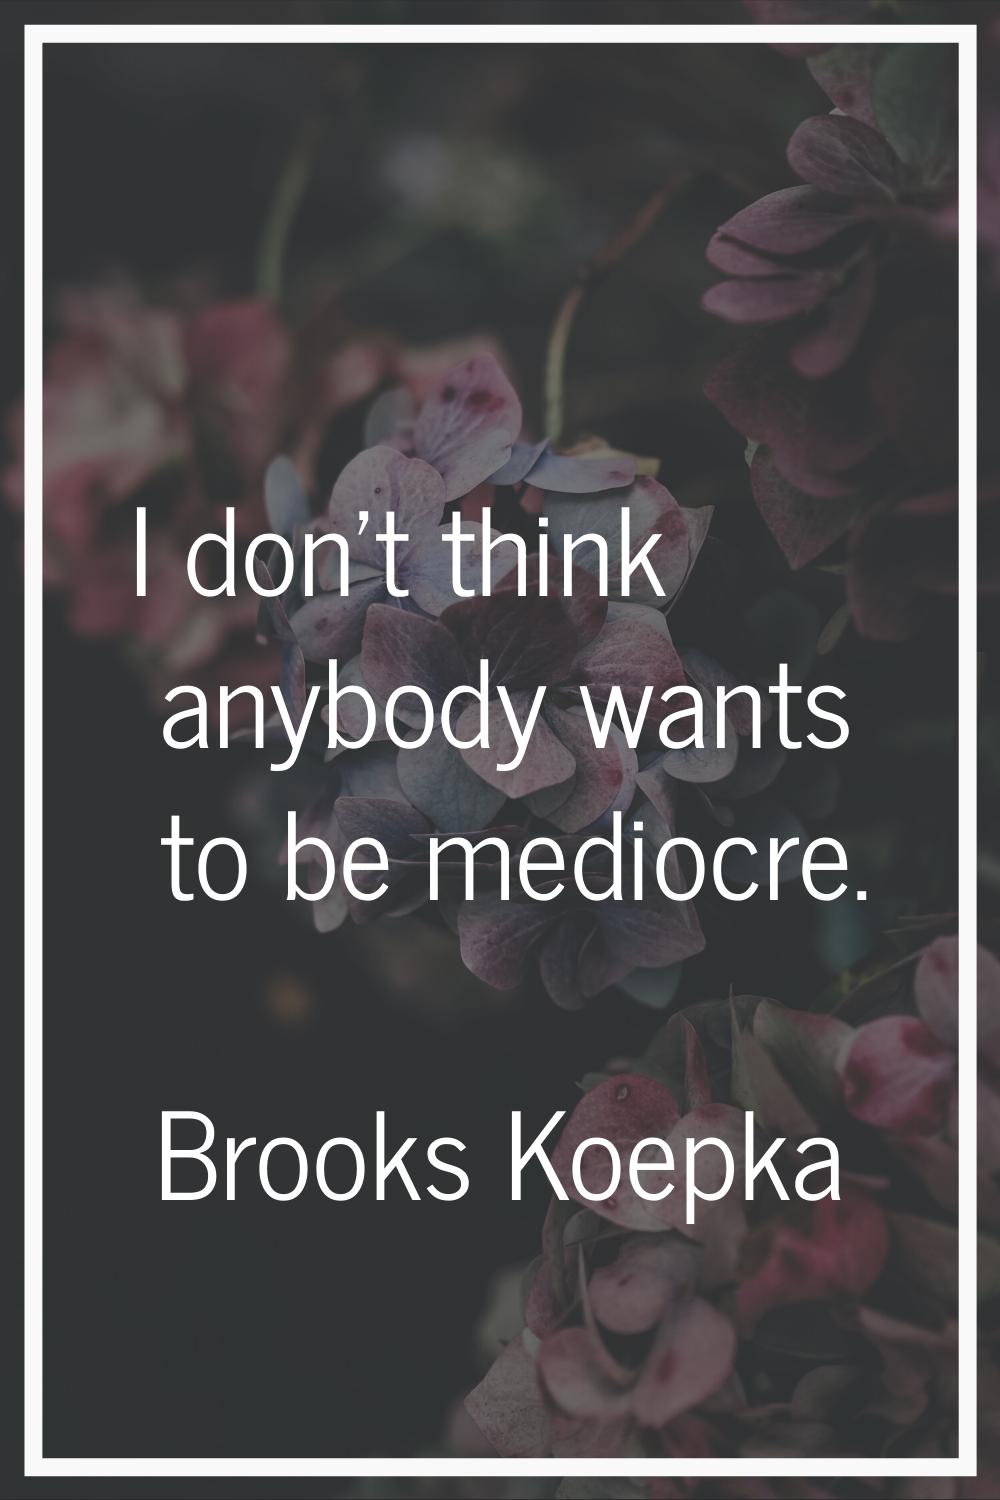 I don't think anybody wants to be mediocre.